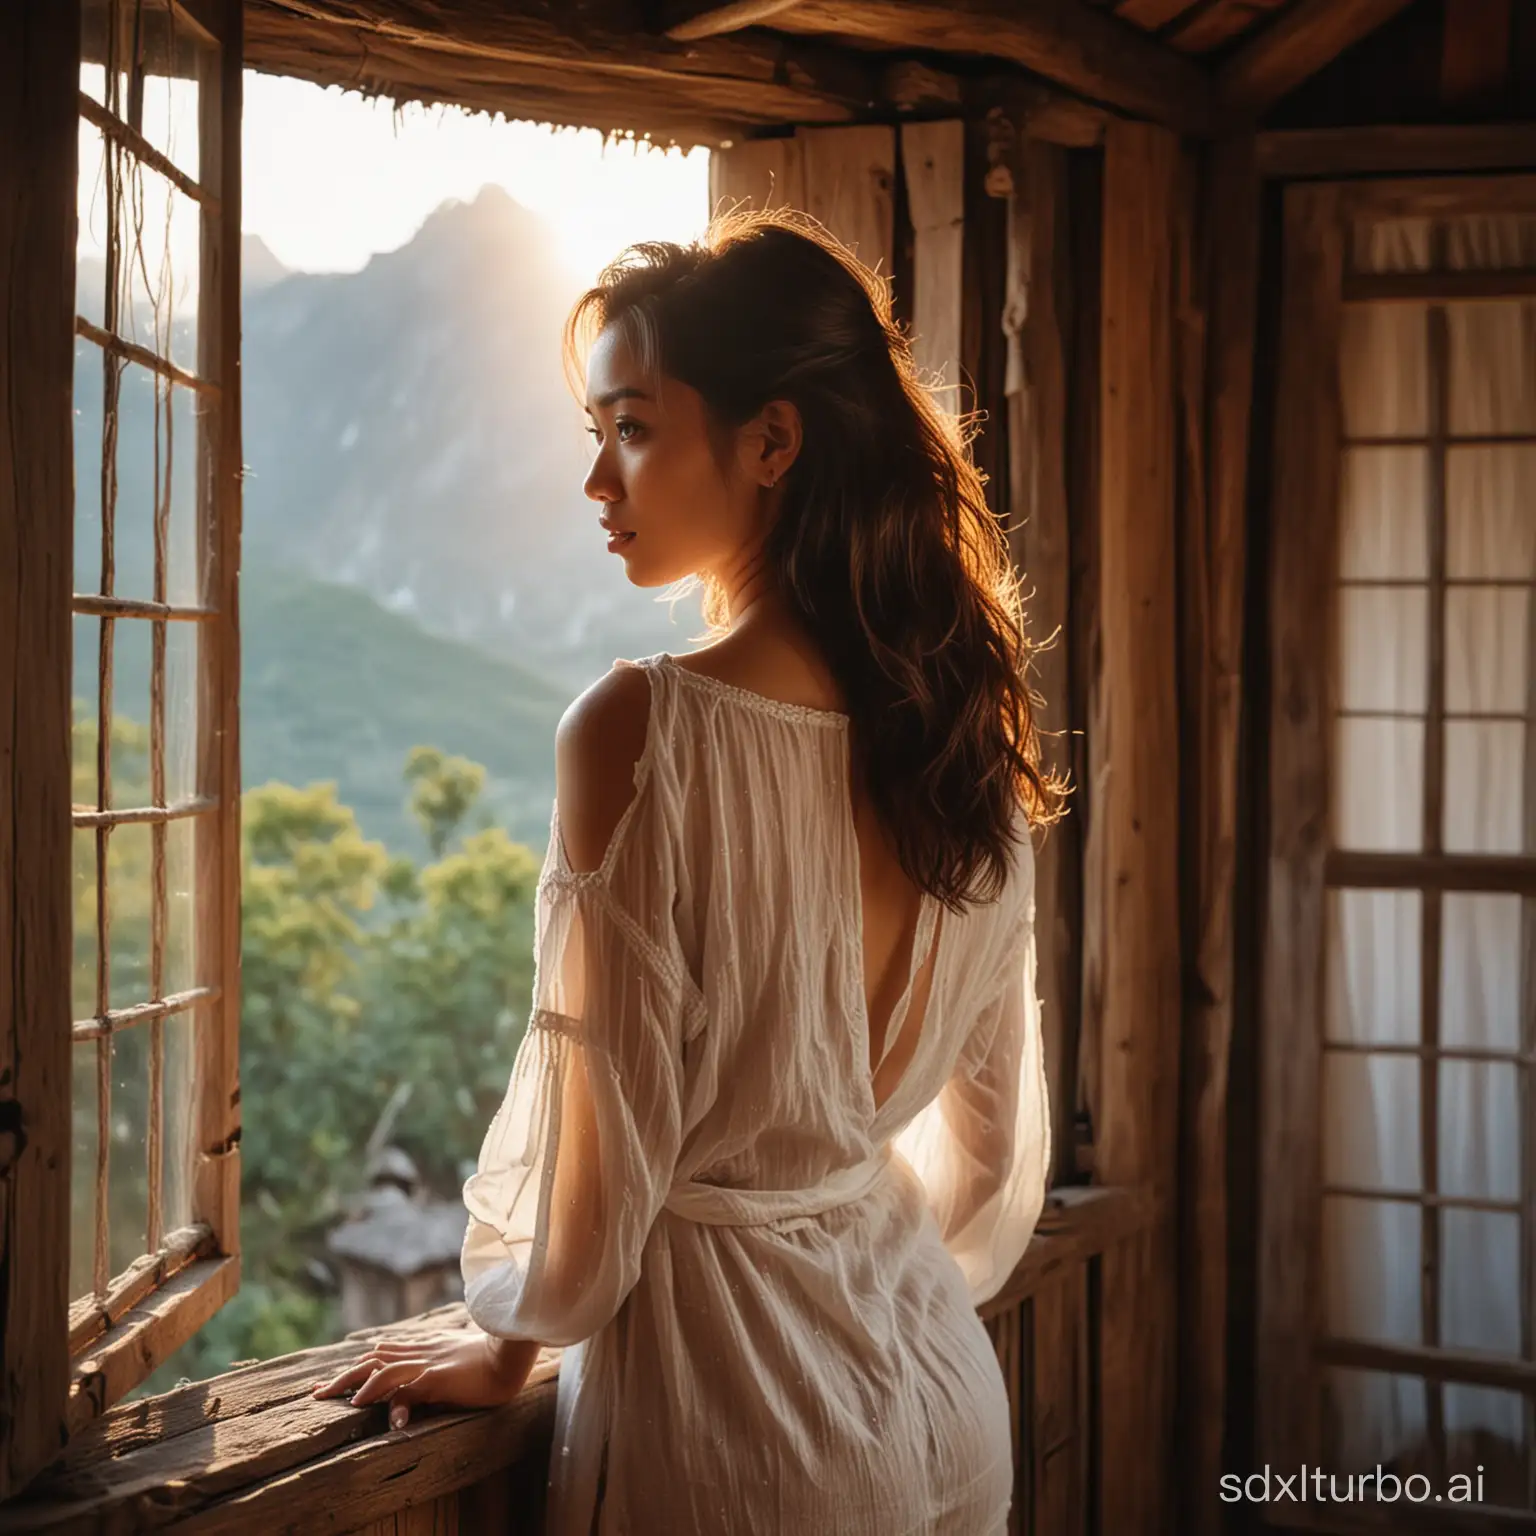 Sensual-Filipina-Woman-in-Medieval-Hut-with-Mountain-View-at-Sunrise